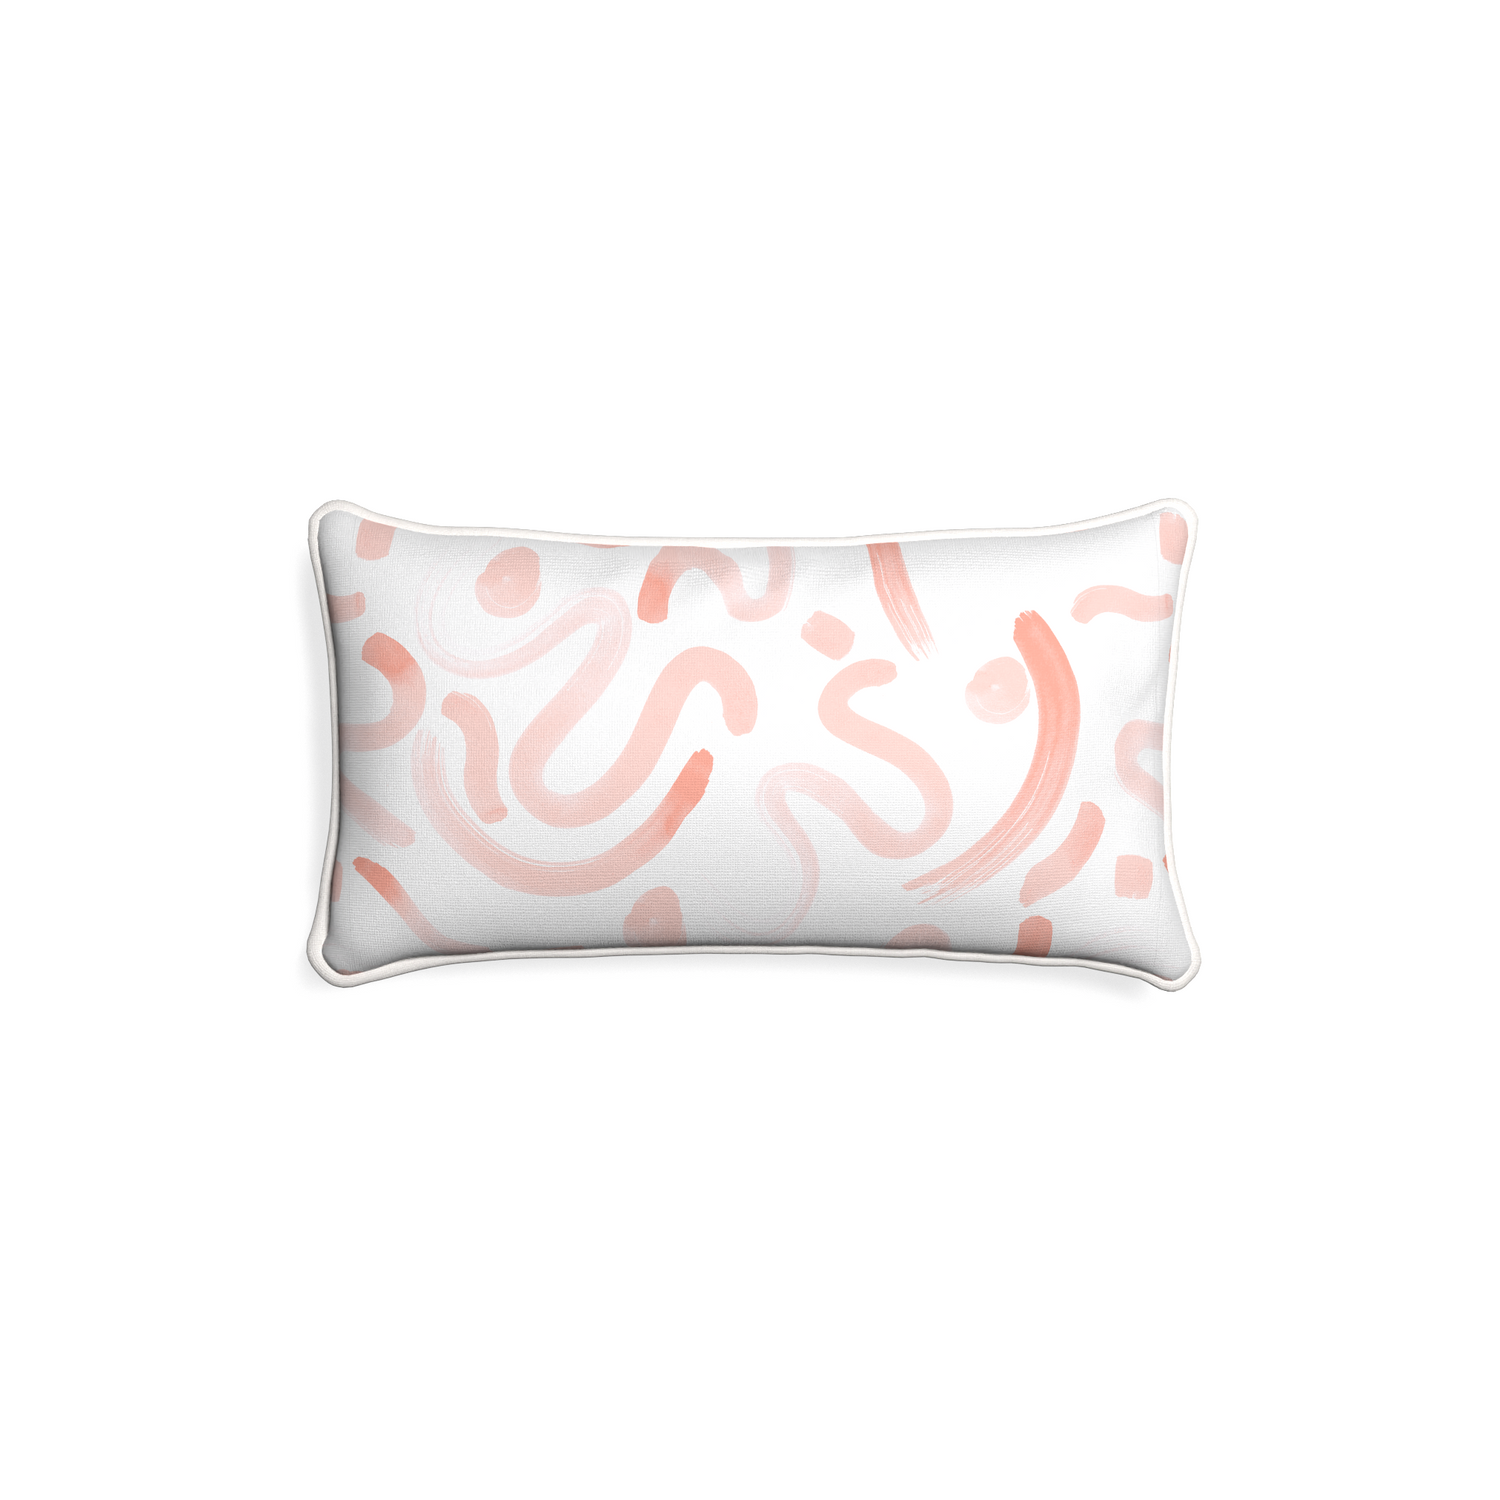 Petite-lumbar hockney pink custom pink graphicpillow with snow piping on white background